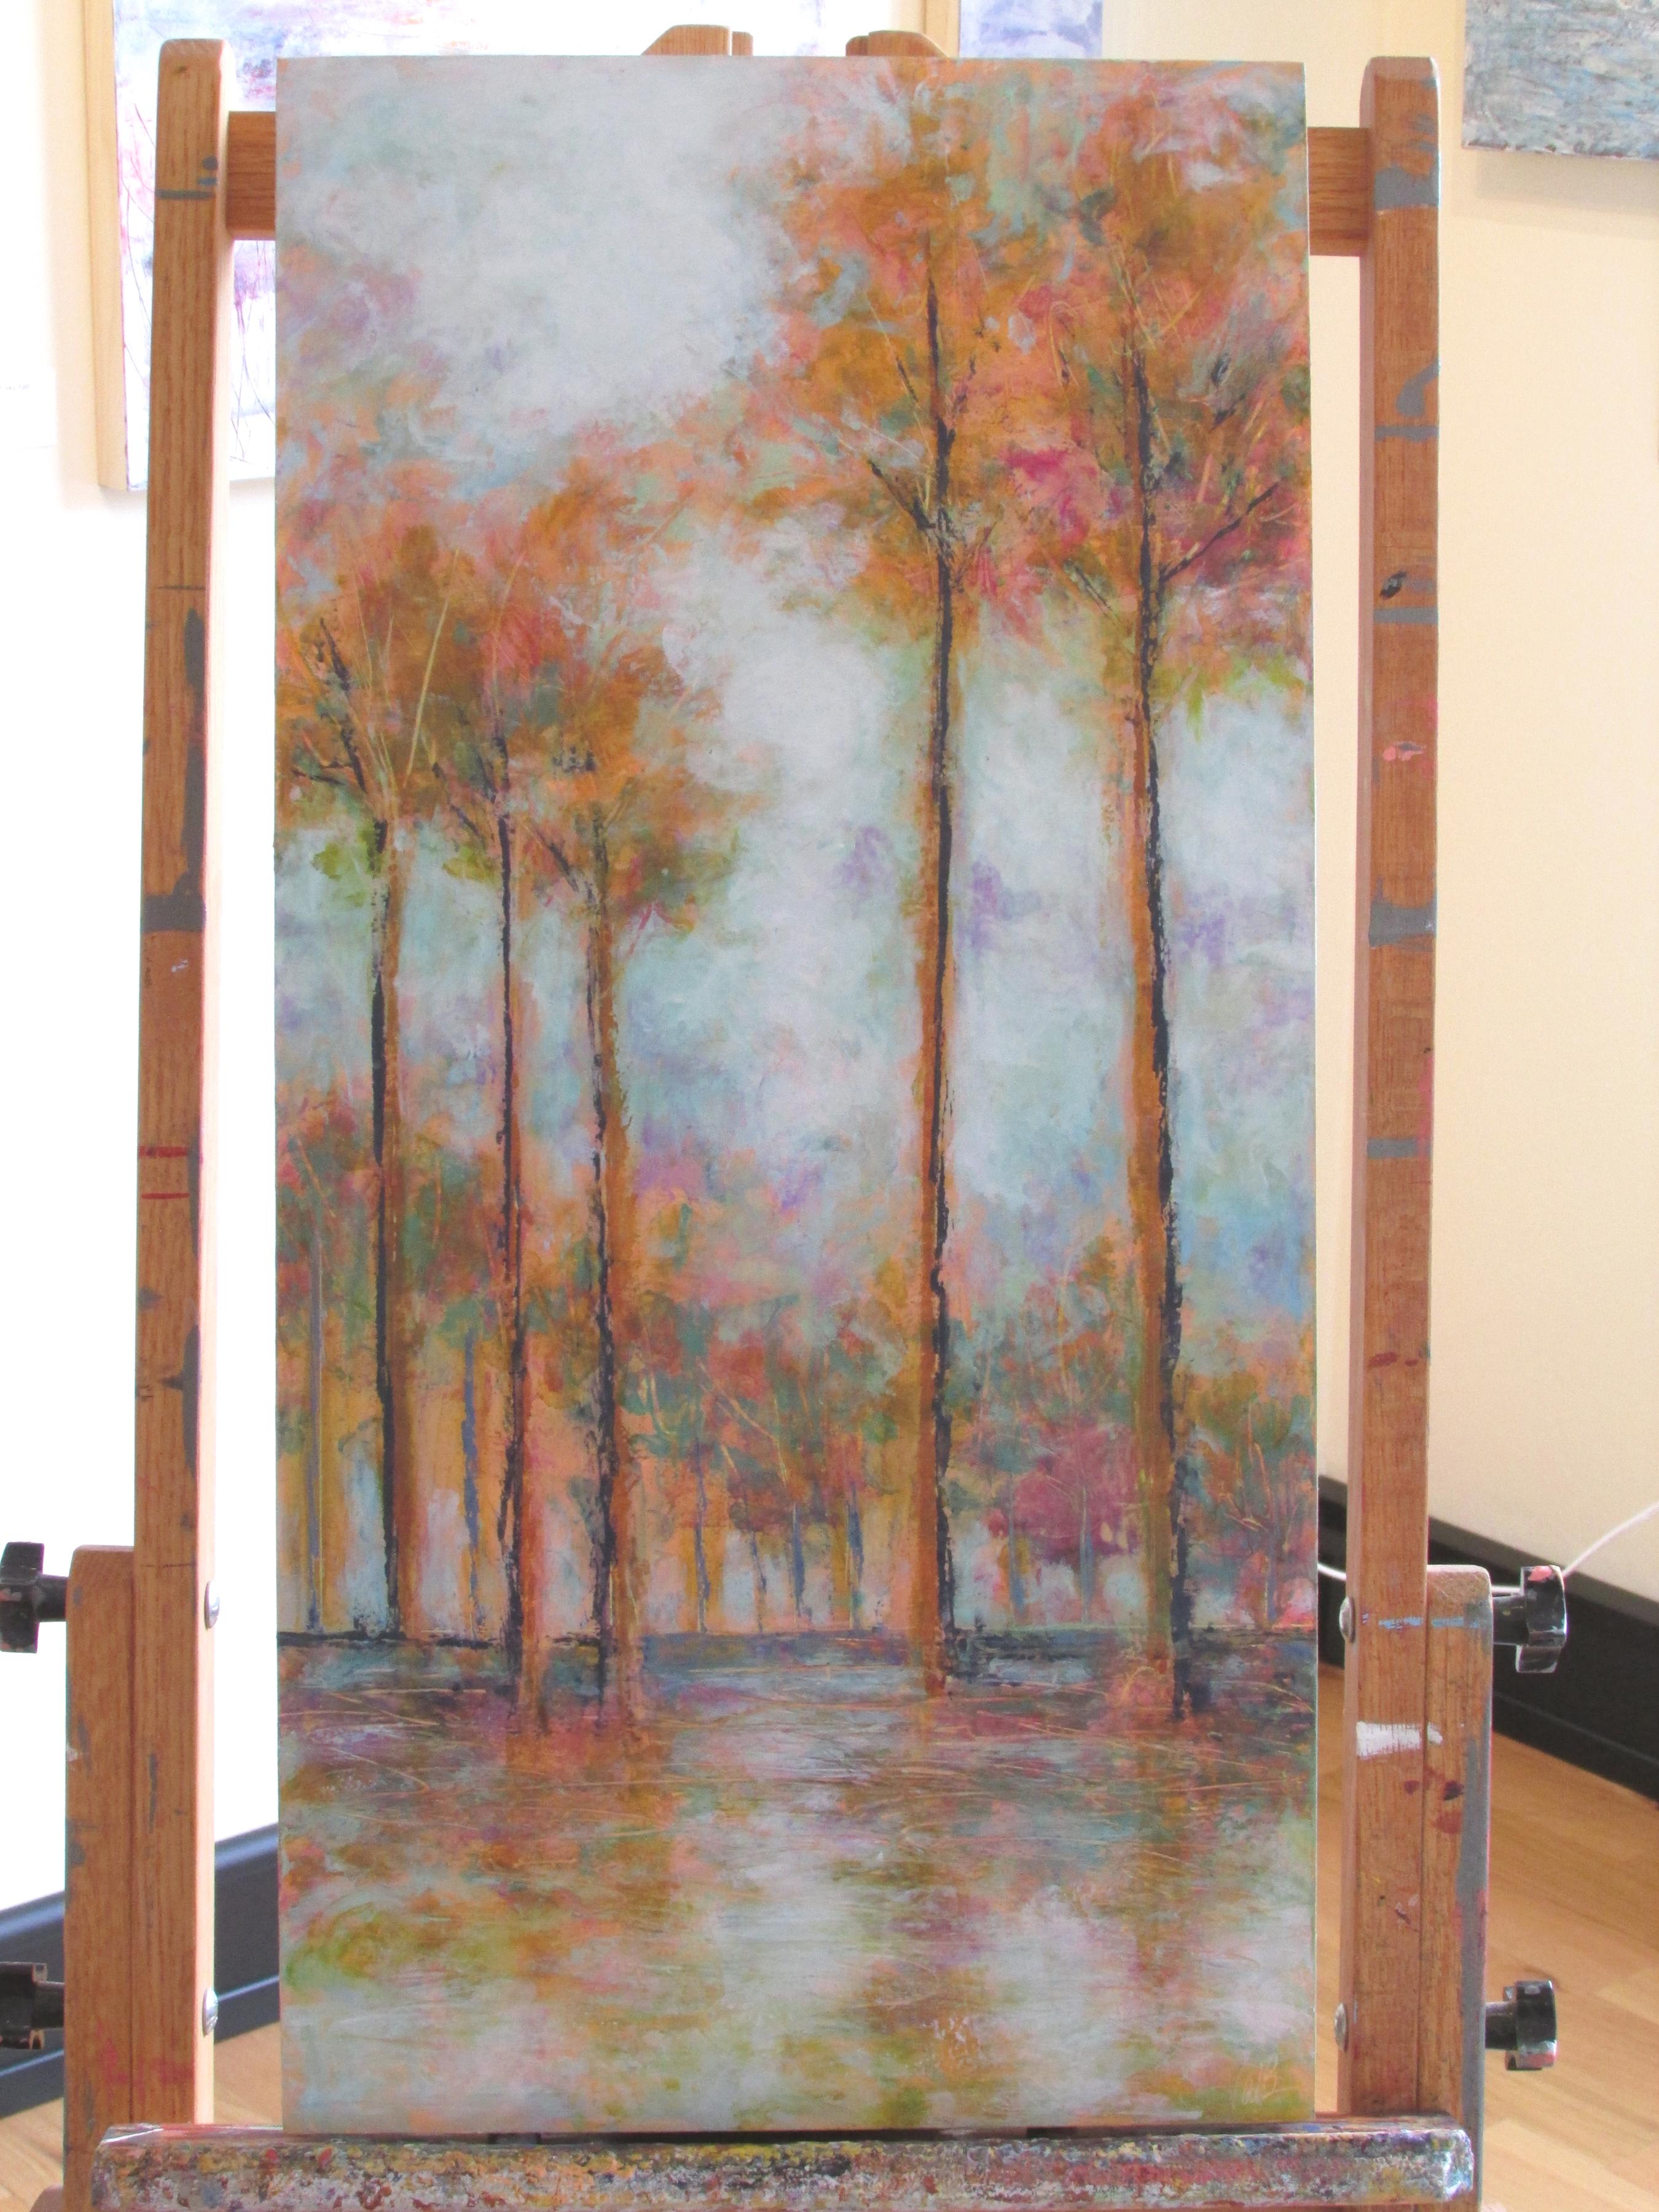 <p>Artist Comments<br />Inspired by Monet's row of cypress trees, I created my own row of trees in soft tones of misty light using layers of transparent oil and cold wax.</p><br /><p>About the Artist<br />Valerie Berkely uses her finger tips as